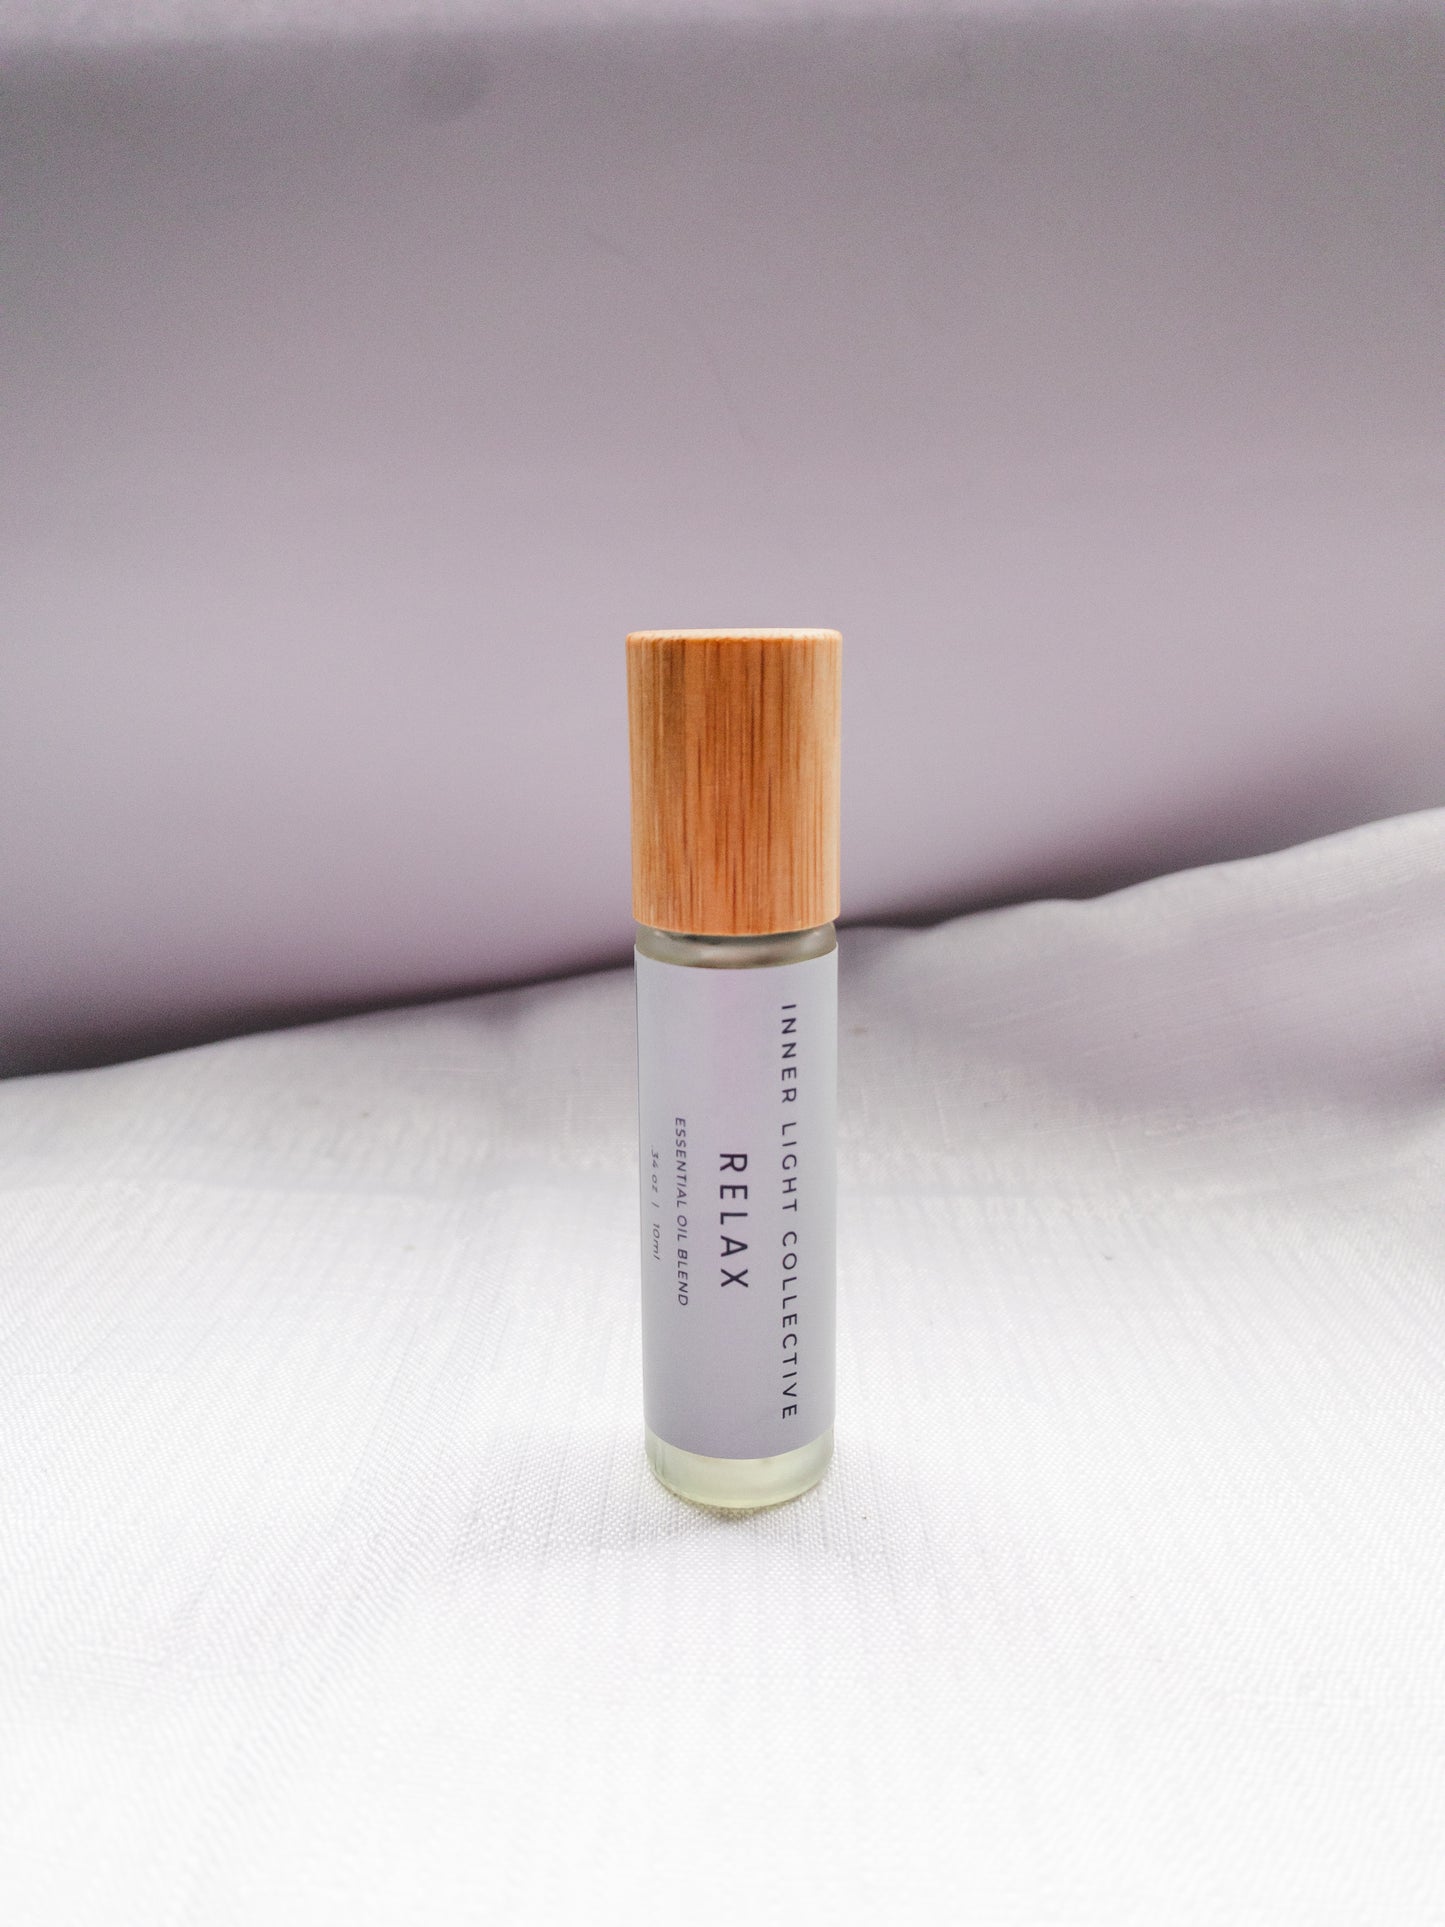 Relax Essential Oil Roller